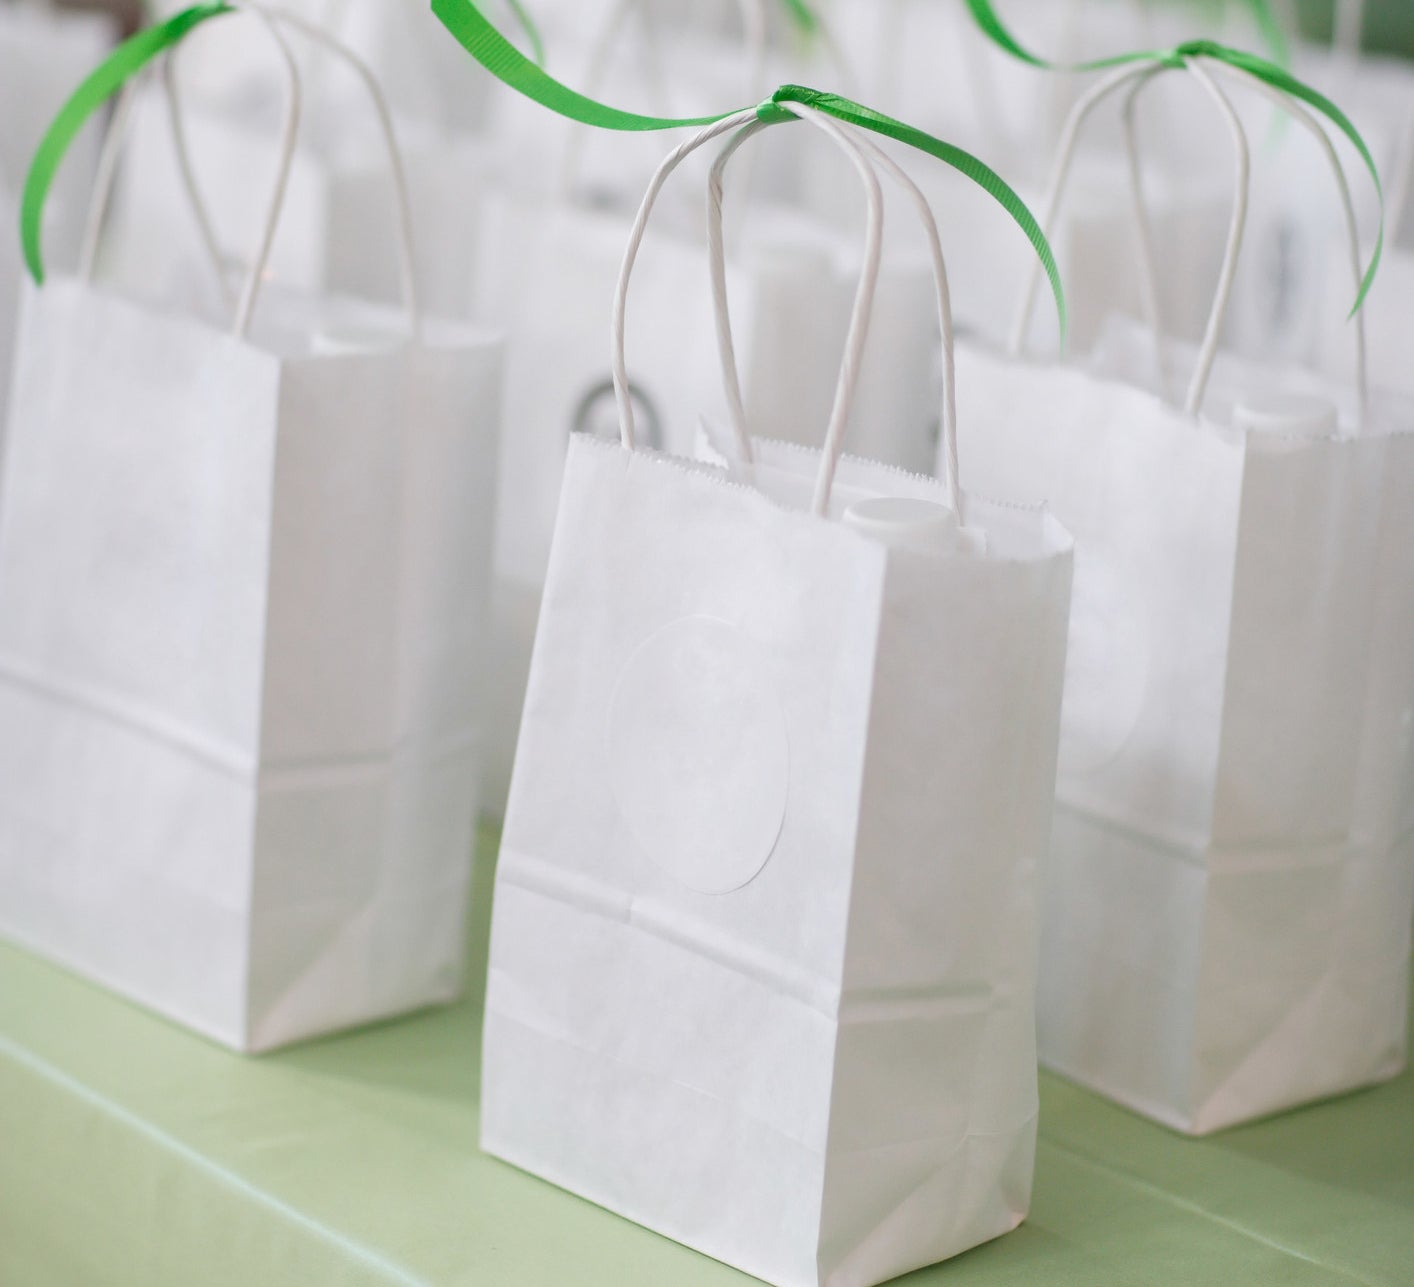 Gift bags on a table